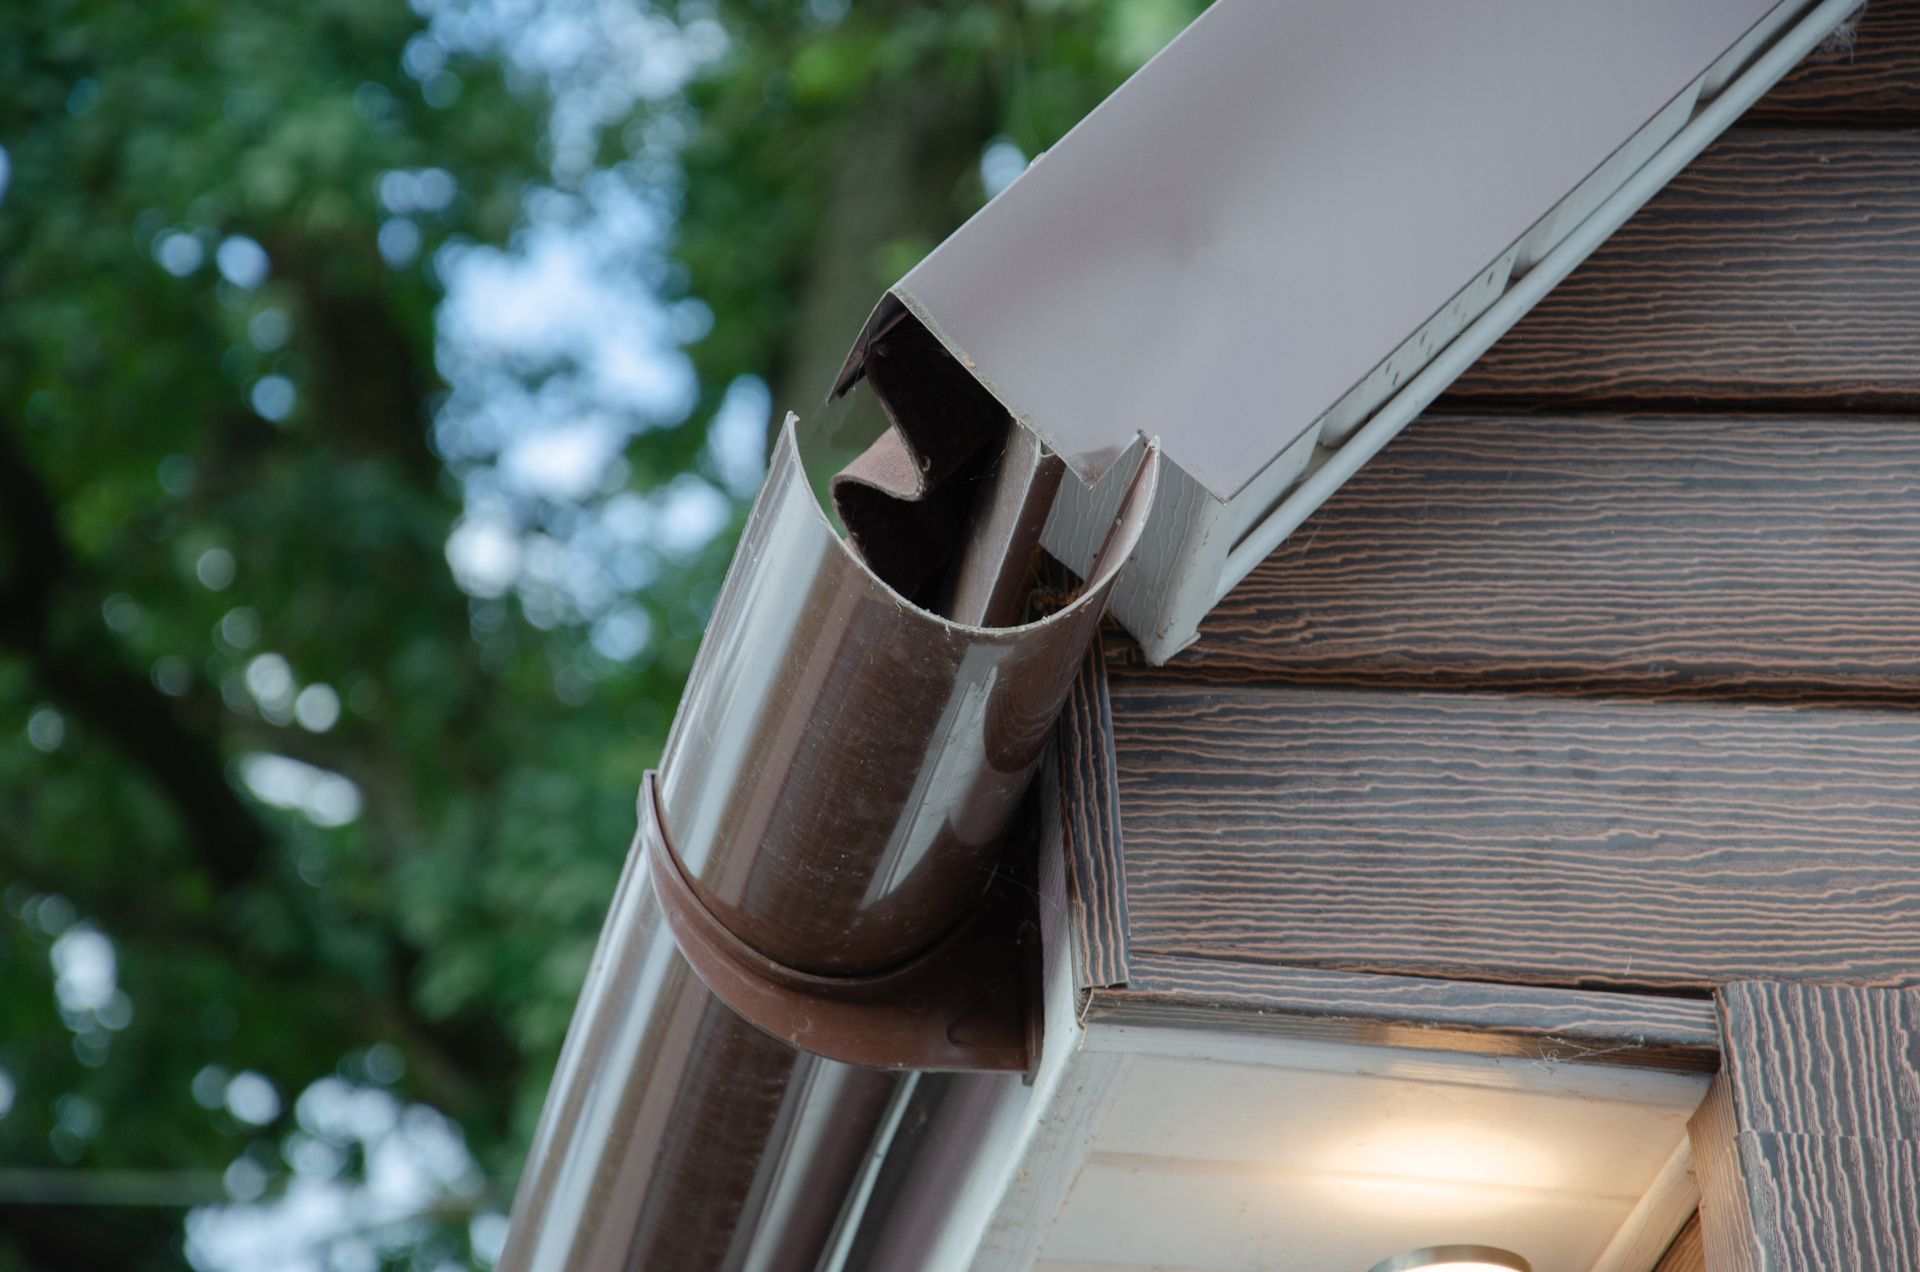 A brown gutter is attached to the side of a house.